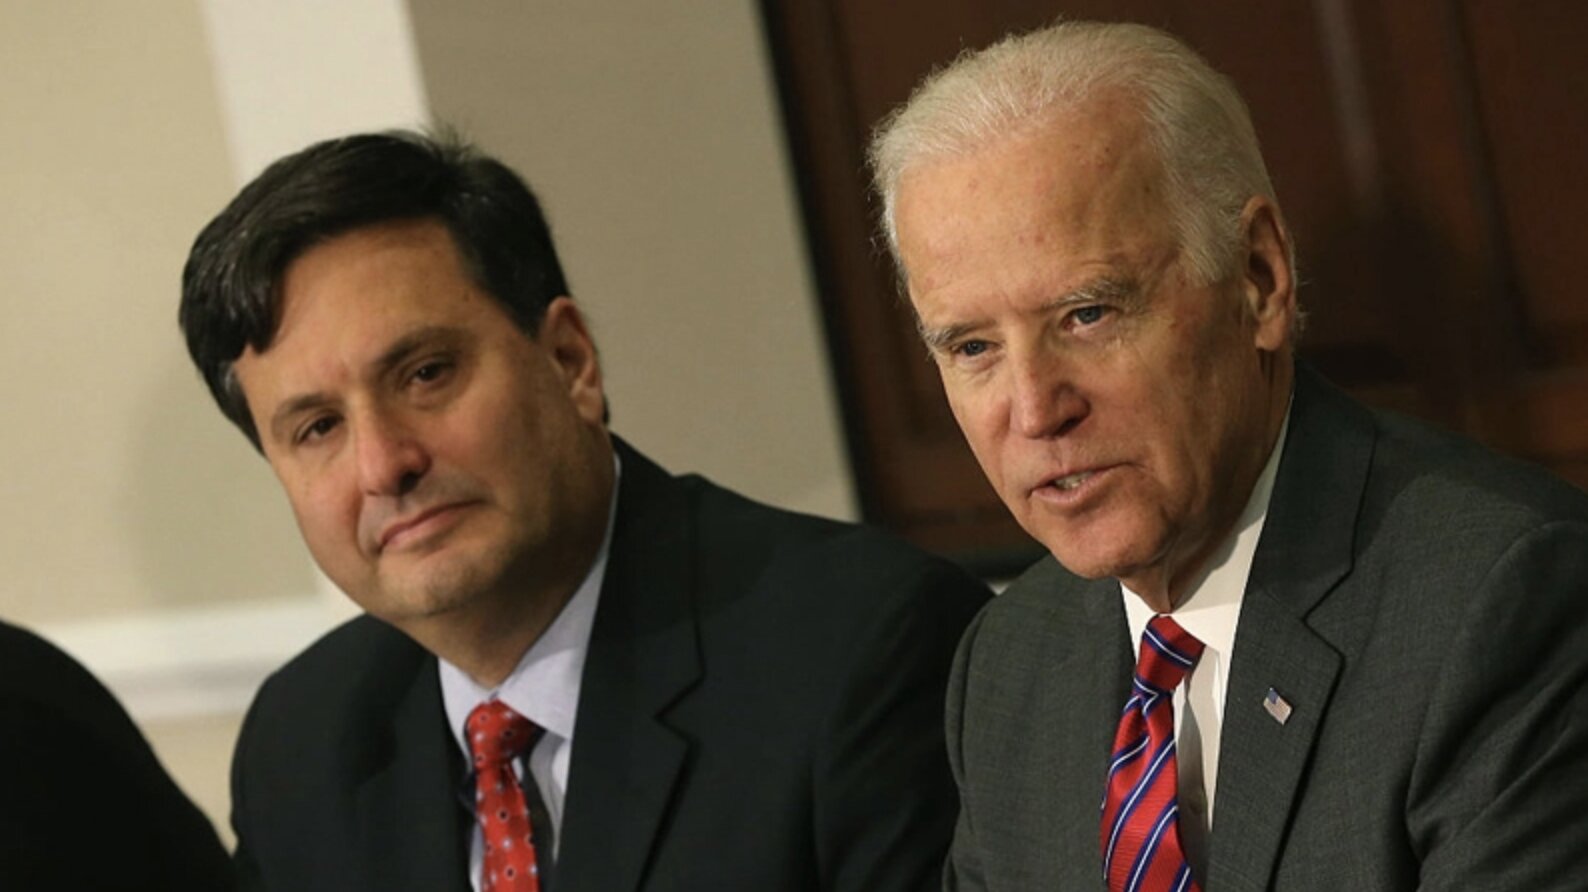 Flashback: Biden’s Chief of Staff Pick Said Elections Are “Rigged”